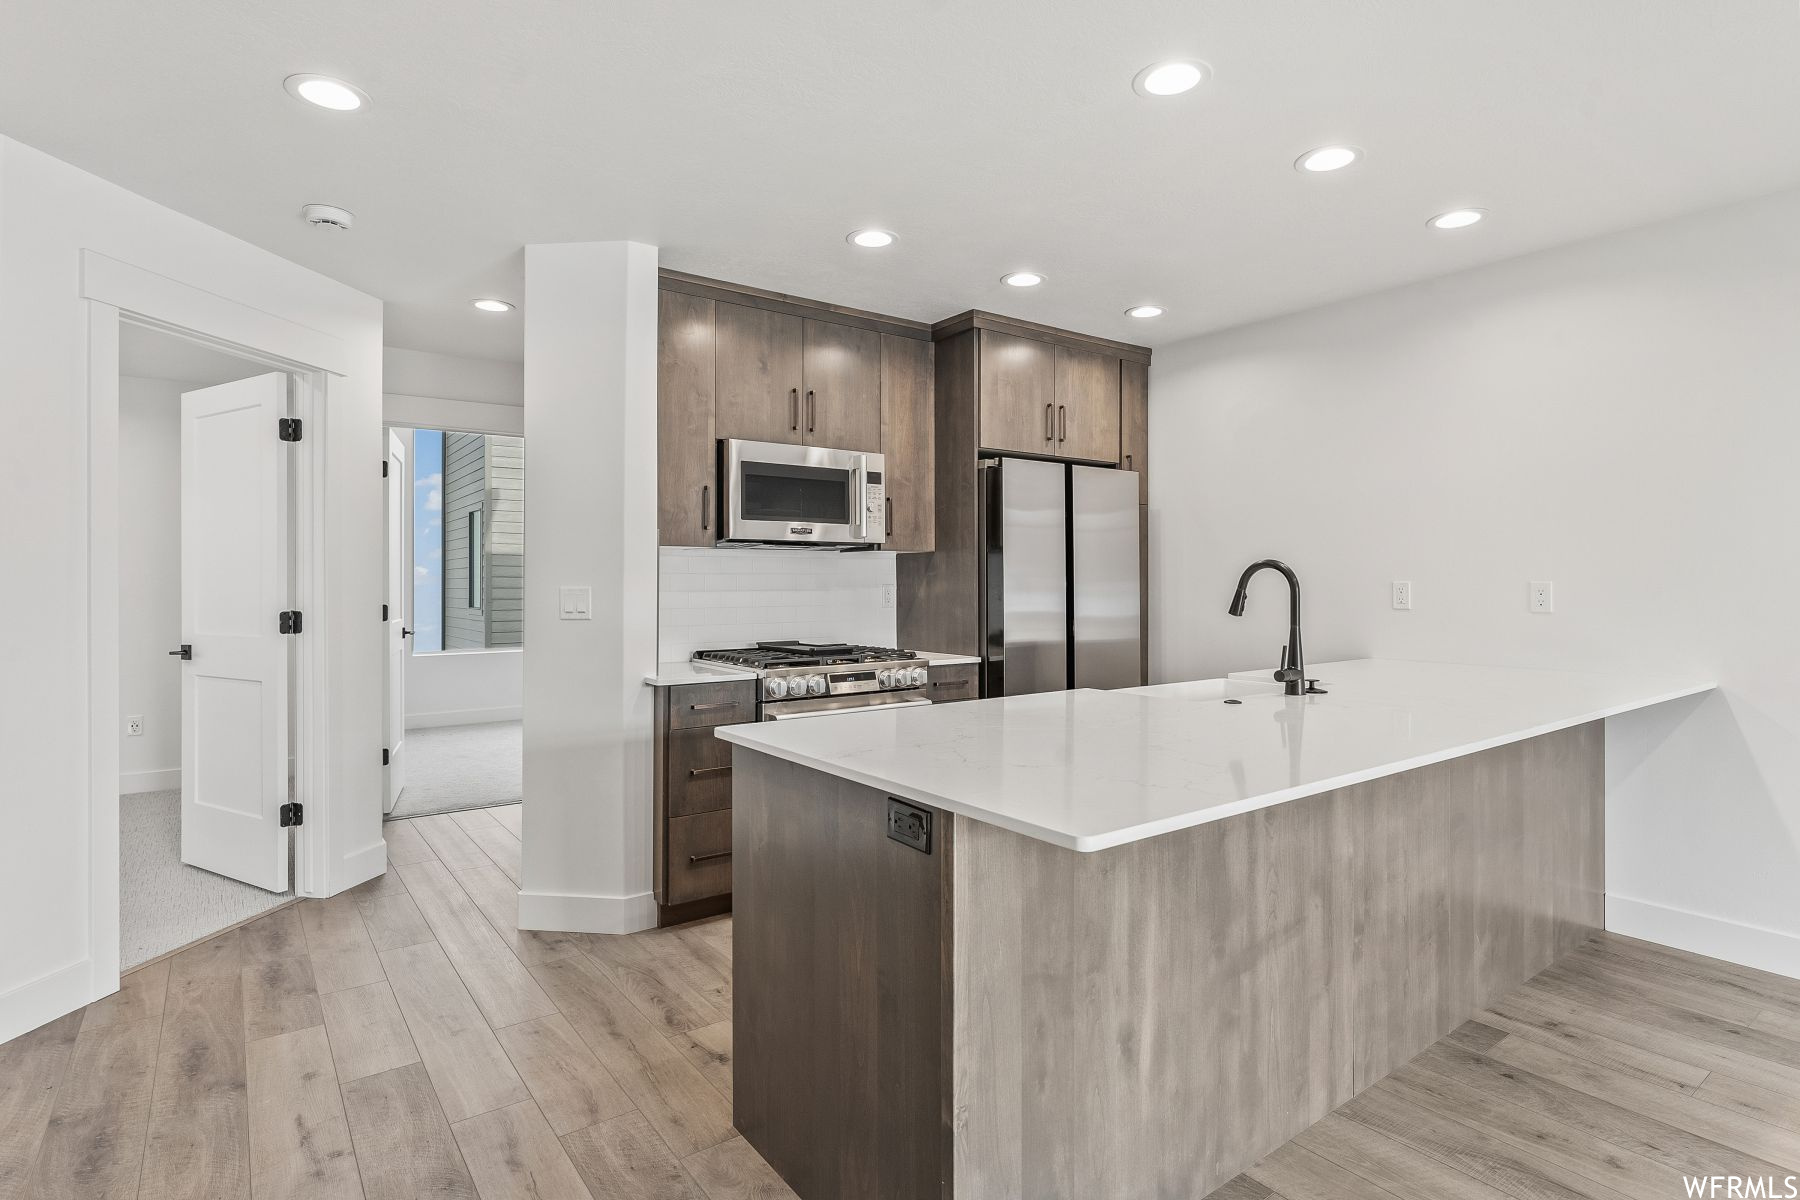 Kitchen featuring sink, appliances with stainless steel finishes, light hardwood / wood-style flooring, and backsplash